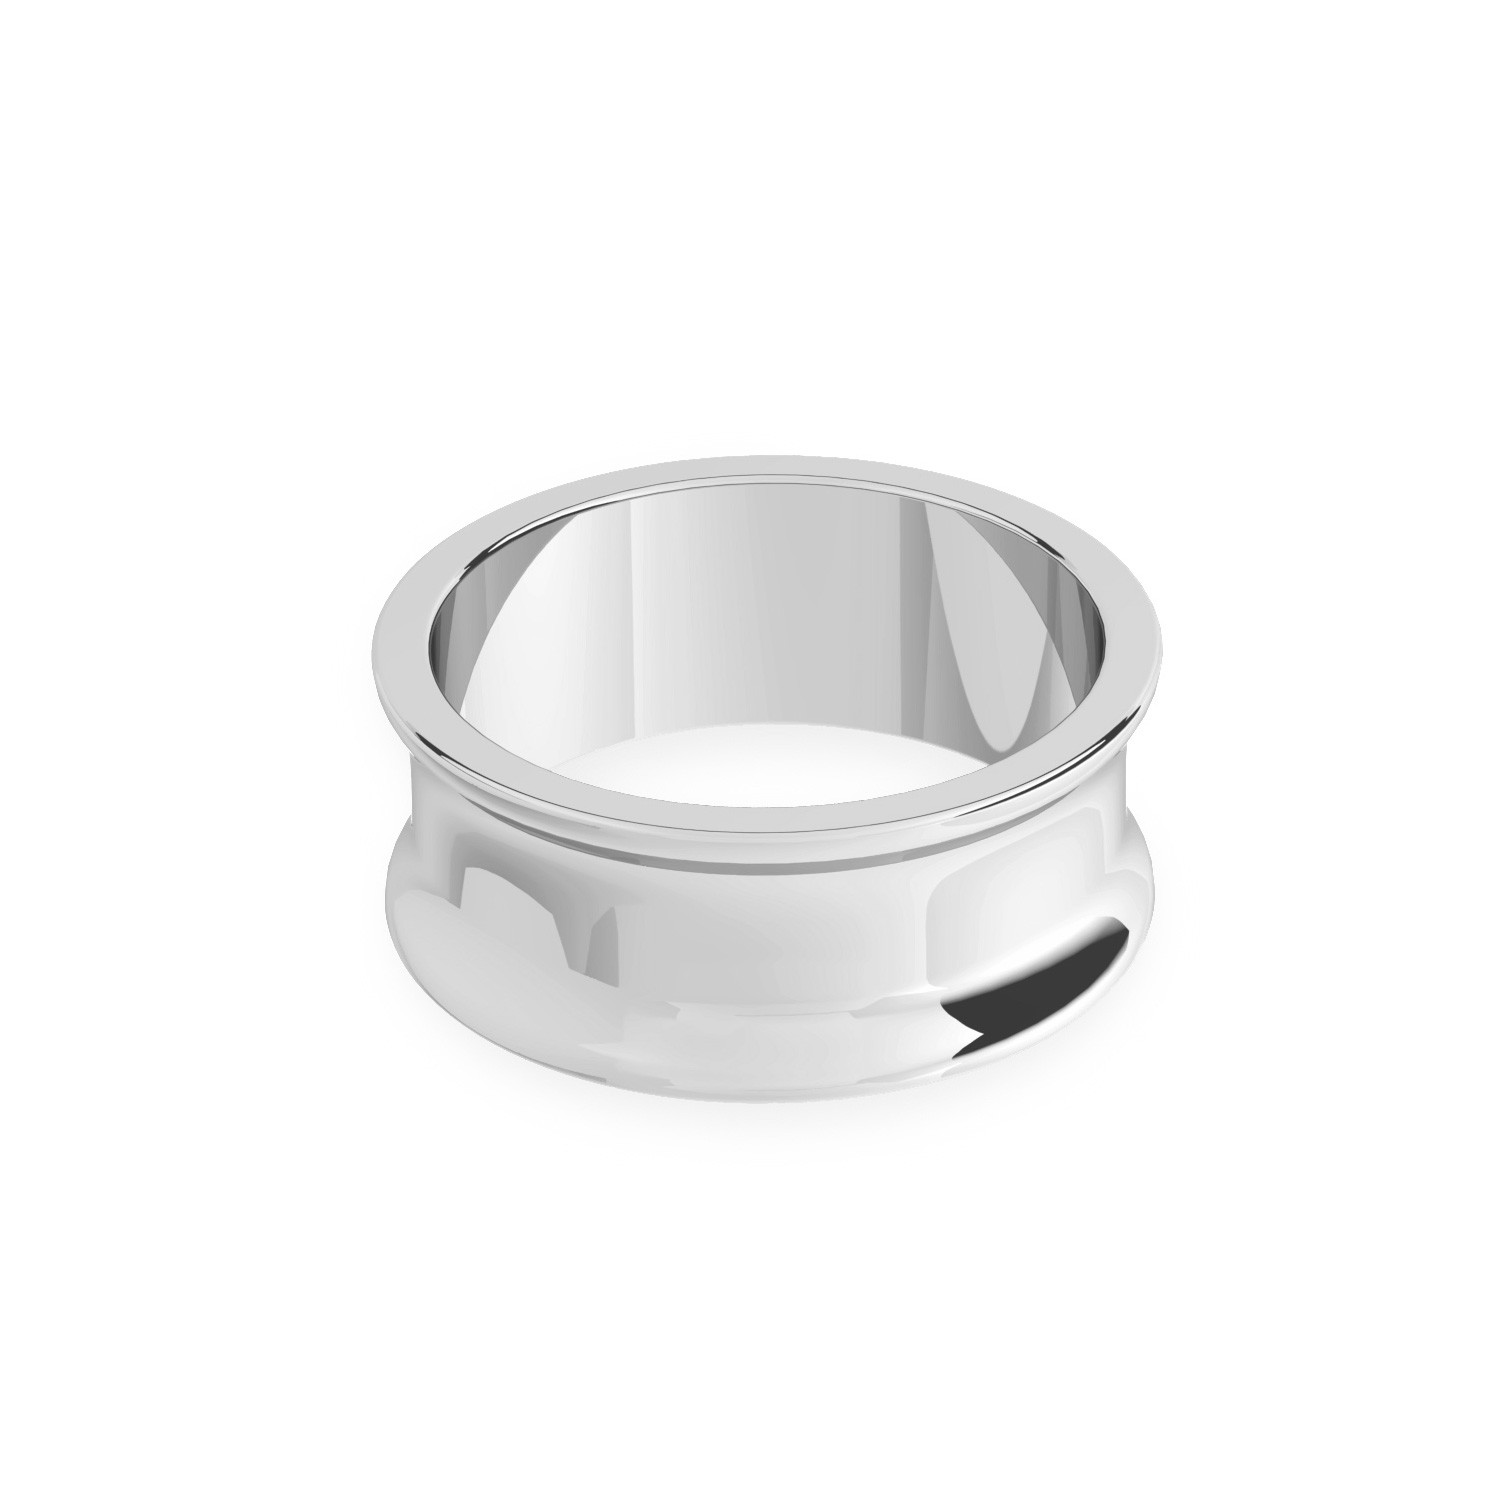 Oval ring, sterling silver 925